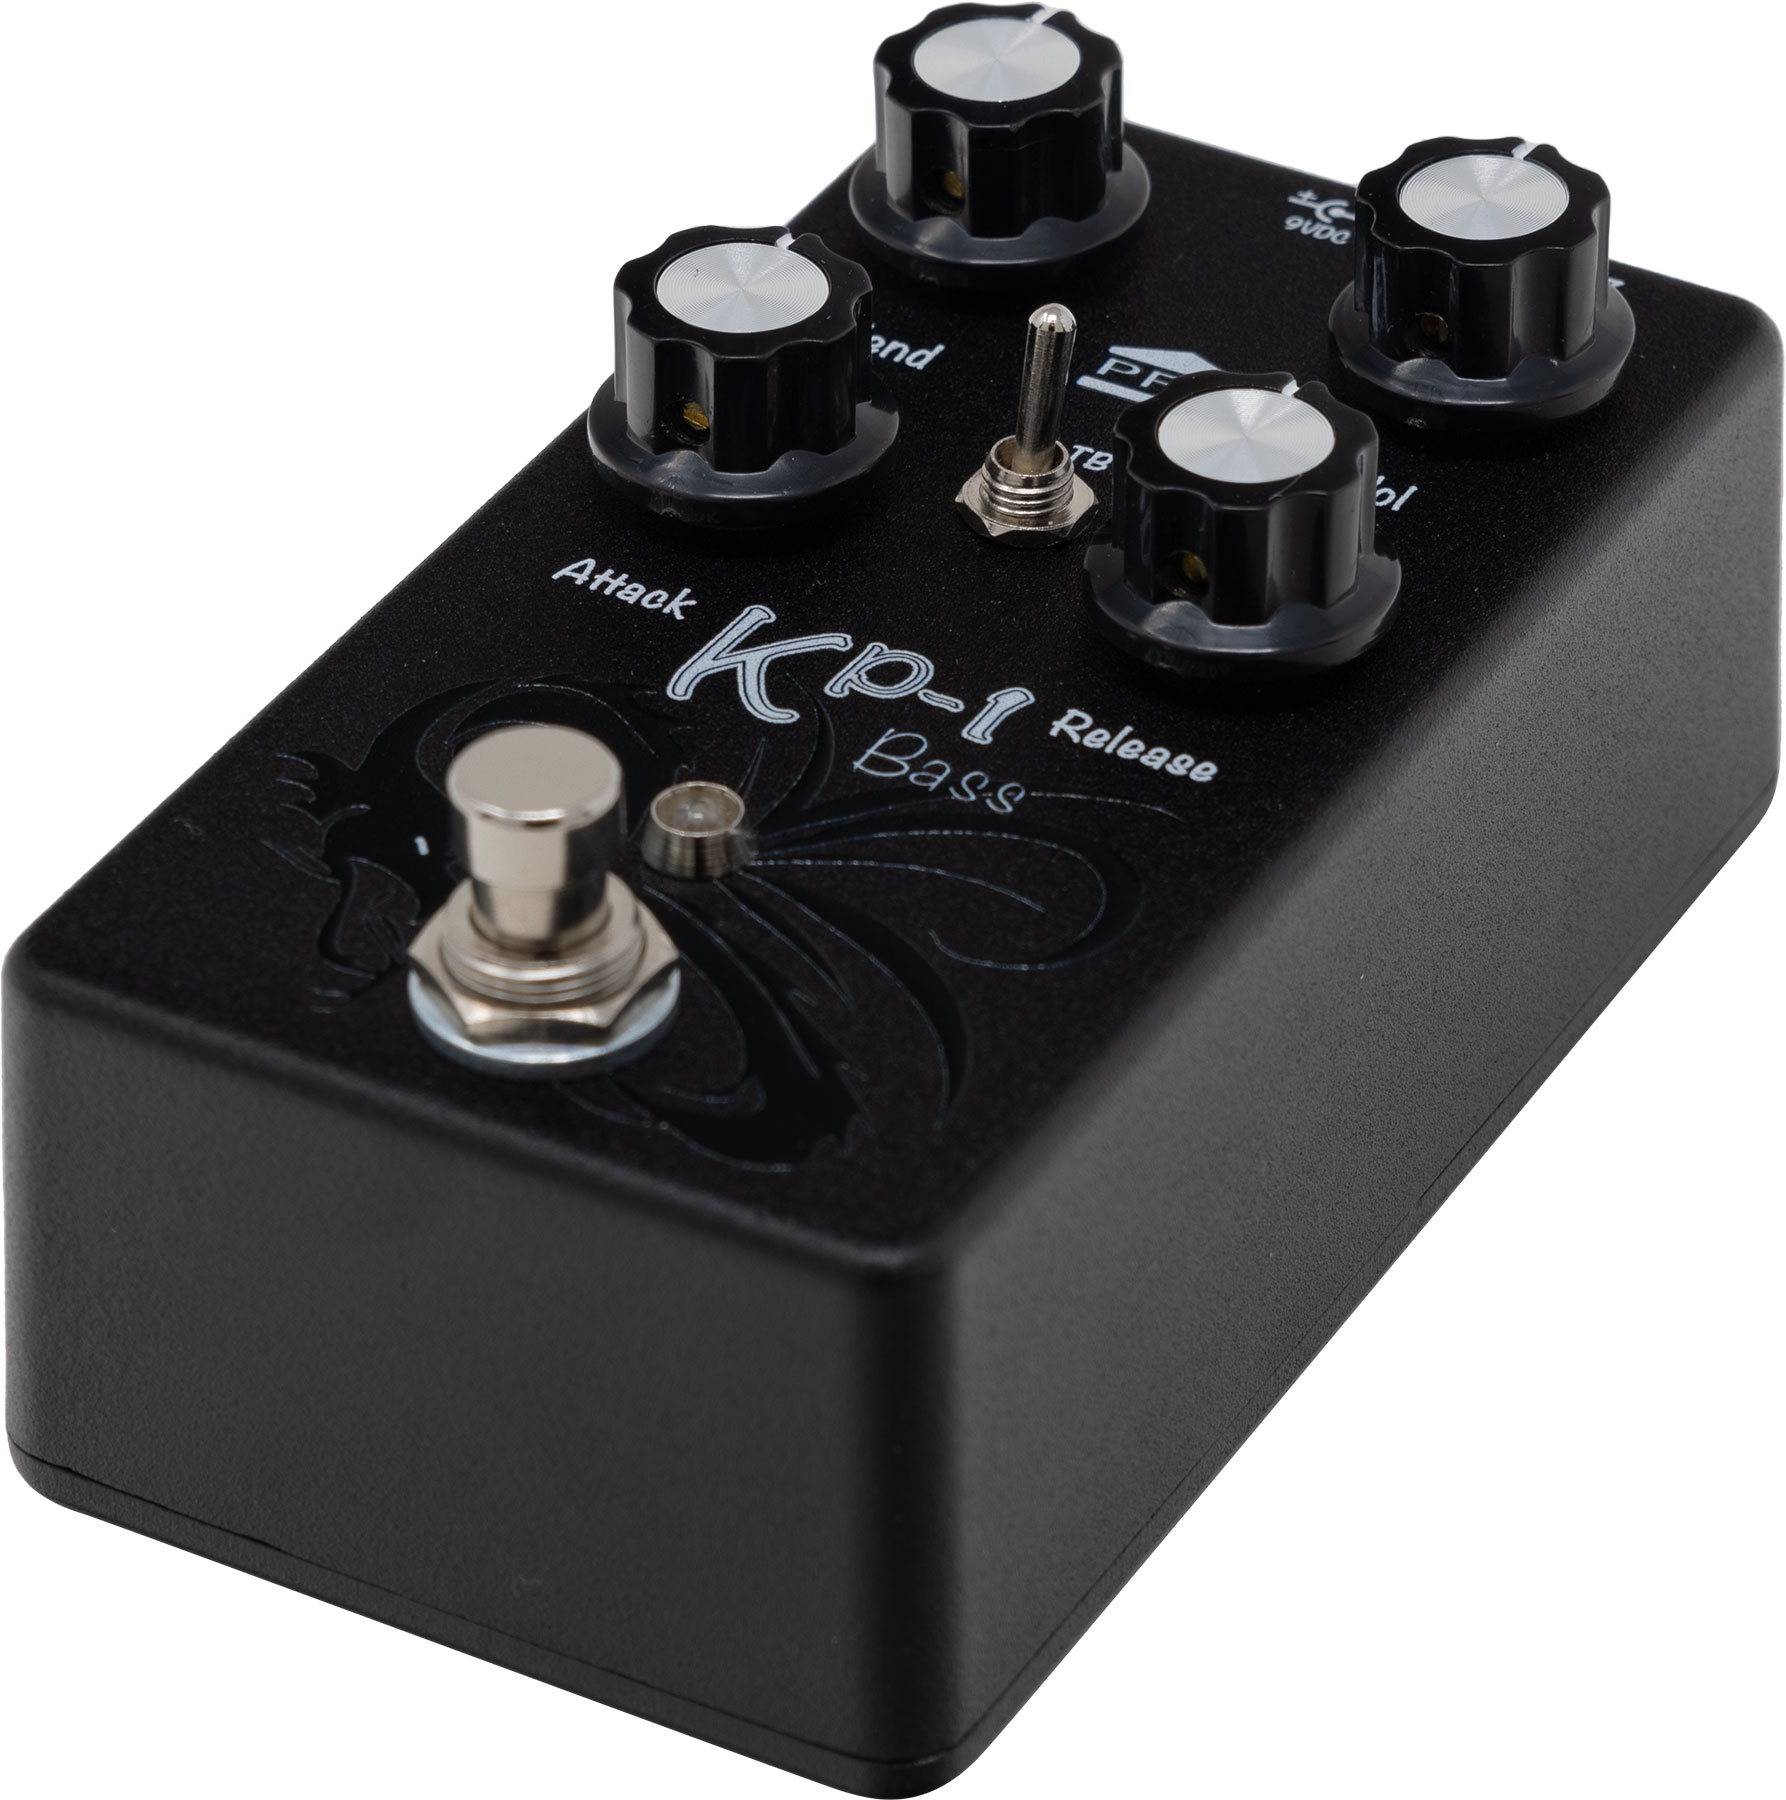 Pfx Circuits Kp-1b Bass Silent Compressor  Sustainer - Compressor, sustain & noise gate effect pedal for bass - Variation 1